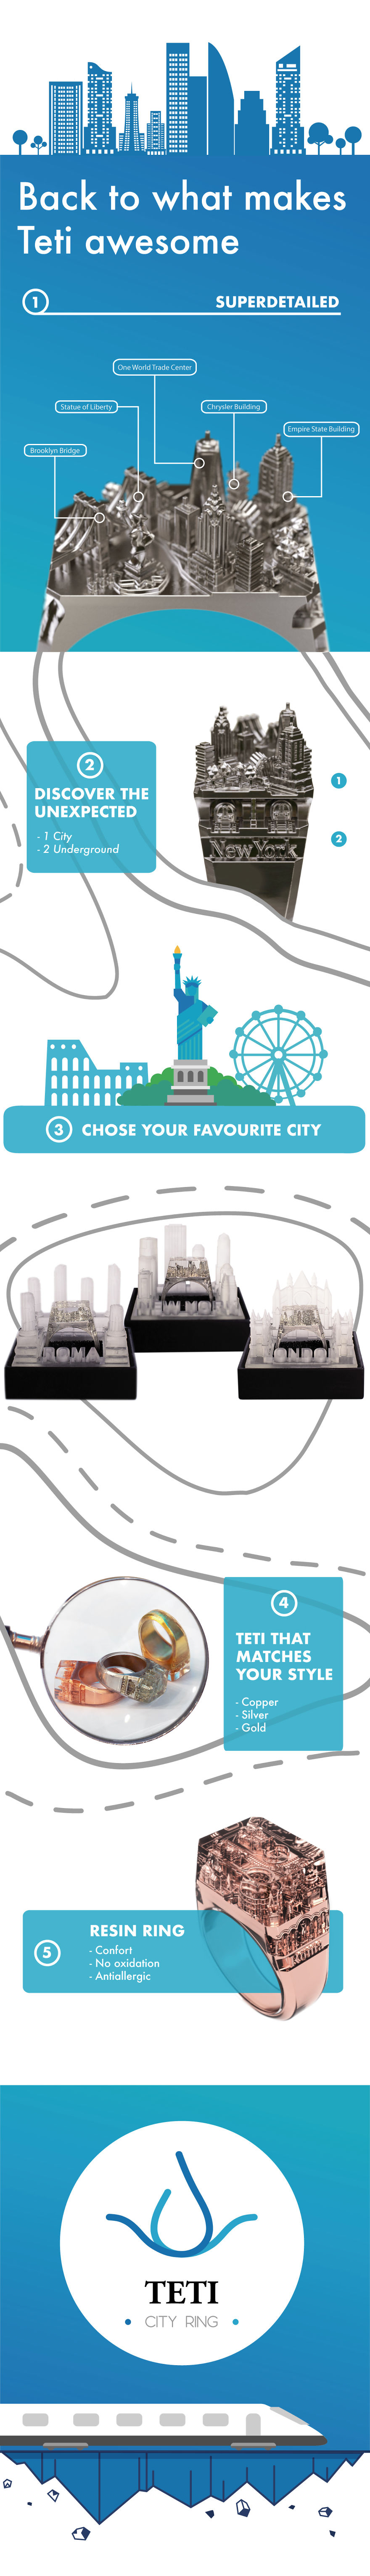 Astoundingly Detailed Architecture Rings Contain Entire City Skylines (Infographic)